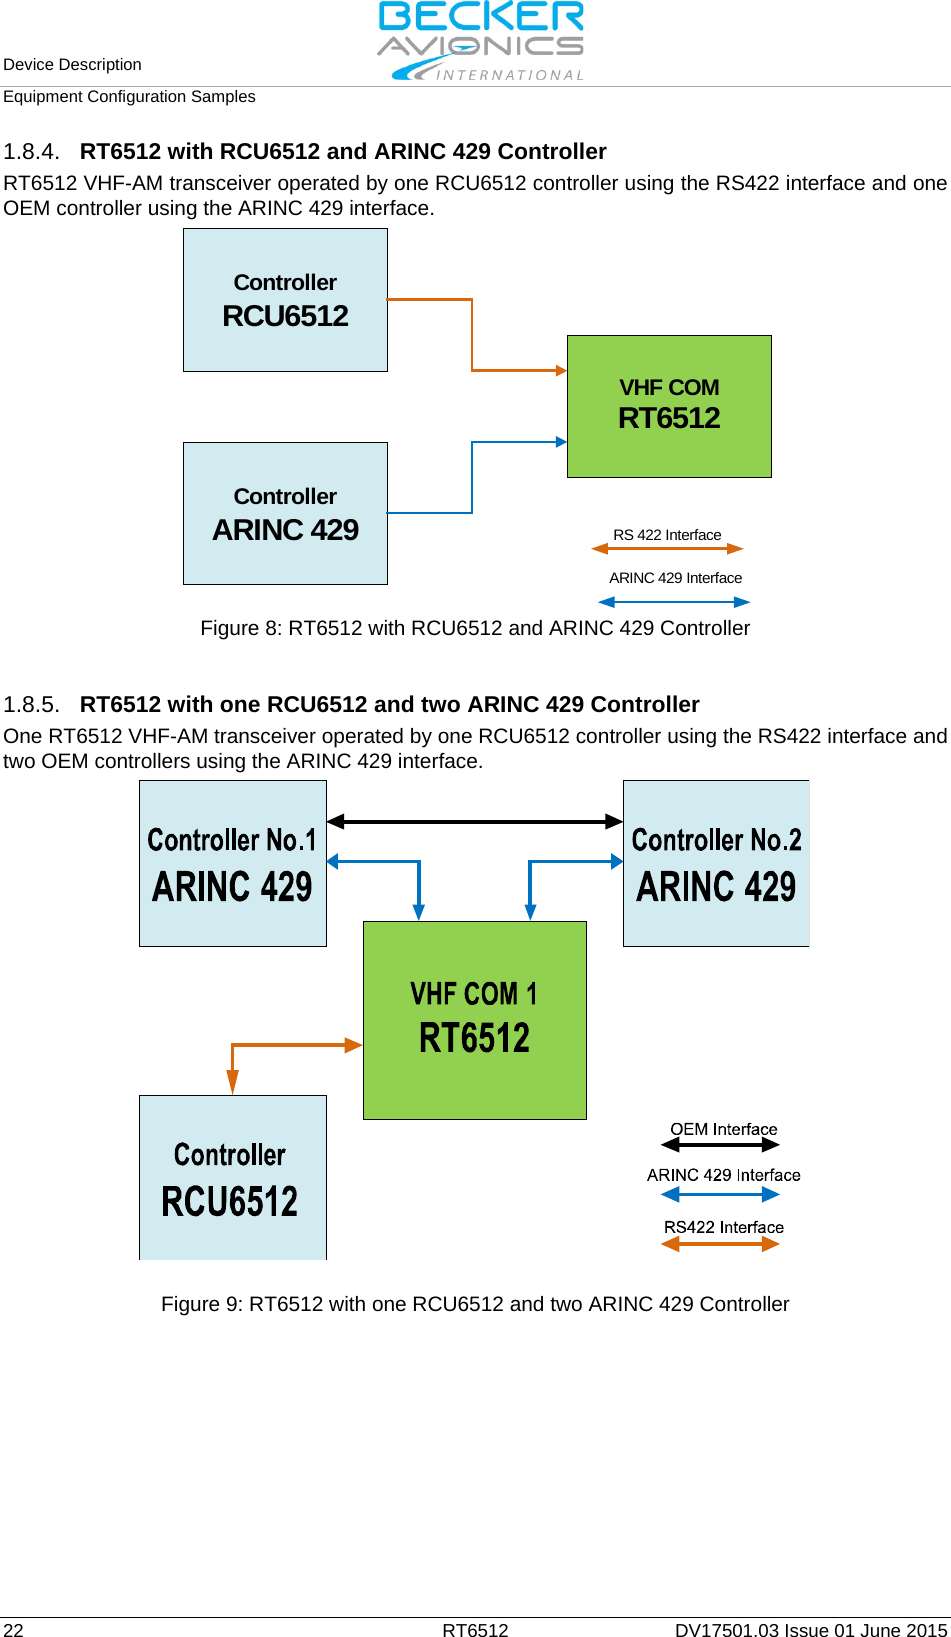 Device Description   Equipment Configuration Samples  22 RT6512 DV17501.03 Issue 01 June 2015 1.8.4. RT6512 with RCU6512 and ARINC 429 Controller RT6512 VHF-AM transceiver operated by one RCU6512 controller using the RS422 interface and one OEM controller using the ARINC 429 interface.  Figure 8: RT6512 with RCU6512 and ARINC 429 Controller   1.8.5. RT6512 with one RCU6512 and two ARINC 429 Controller One RT6512 VHF-AM transceiver operated by one RCU6512 controller using the RS422 interface and two OEM controllers using the ARINC 429 interface.  Figure 9: RT6512 with one RCU6512 and two ARINC 429 Controller   ControllerRCU6512VHF COMRT6512ControllerARINC 429ARINC 429 InterfaceRS 422 Interface